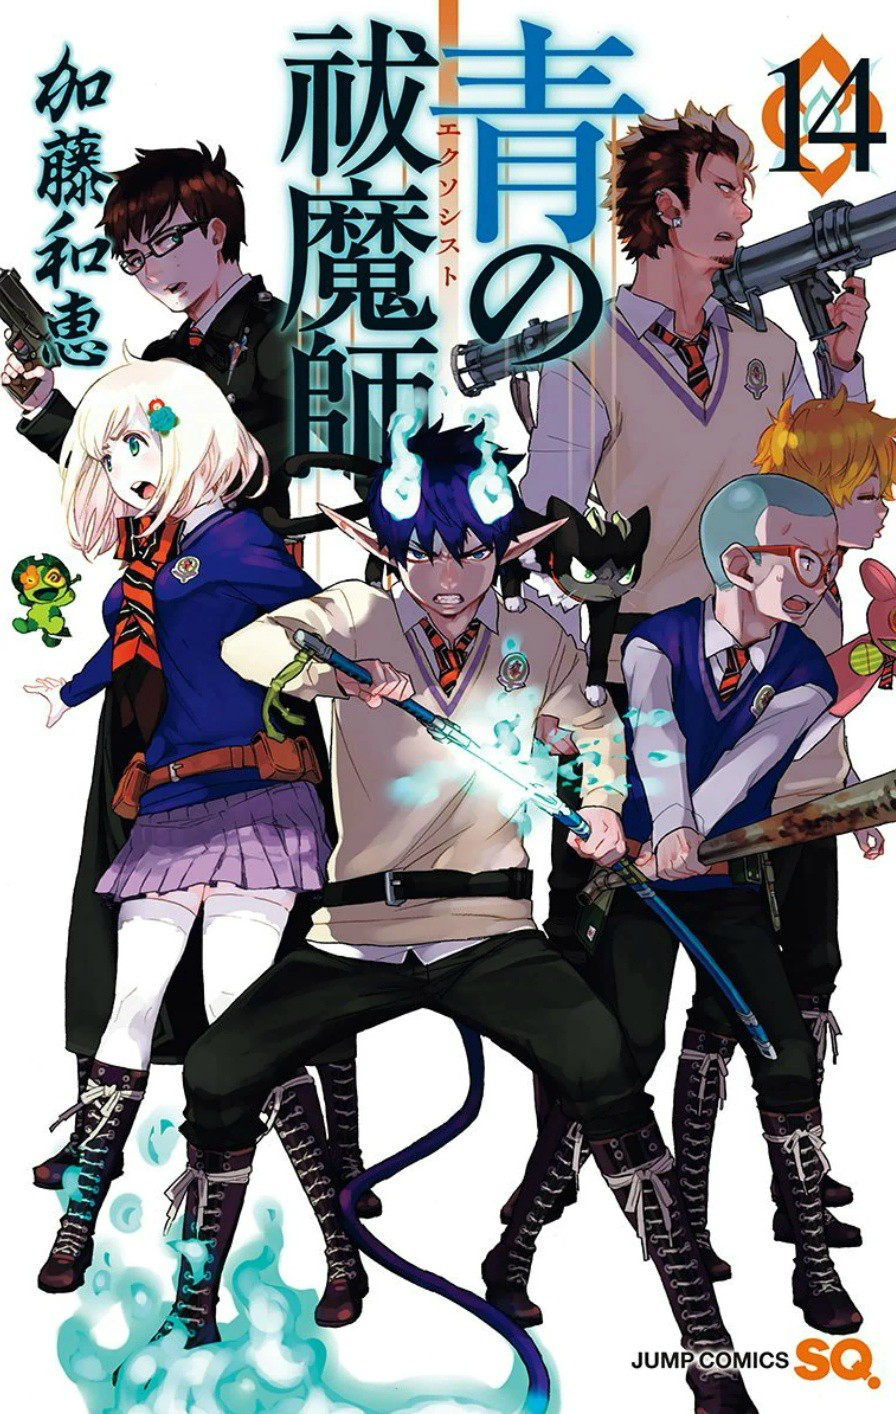 4 Reasons You Should Be Watching Blue Exorcist